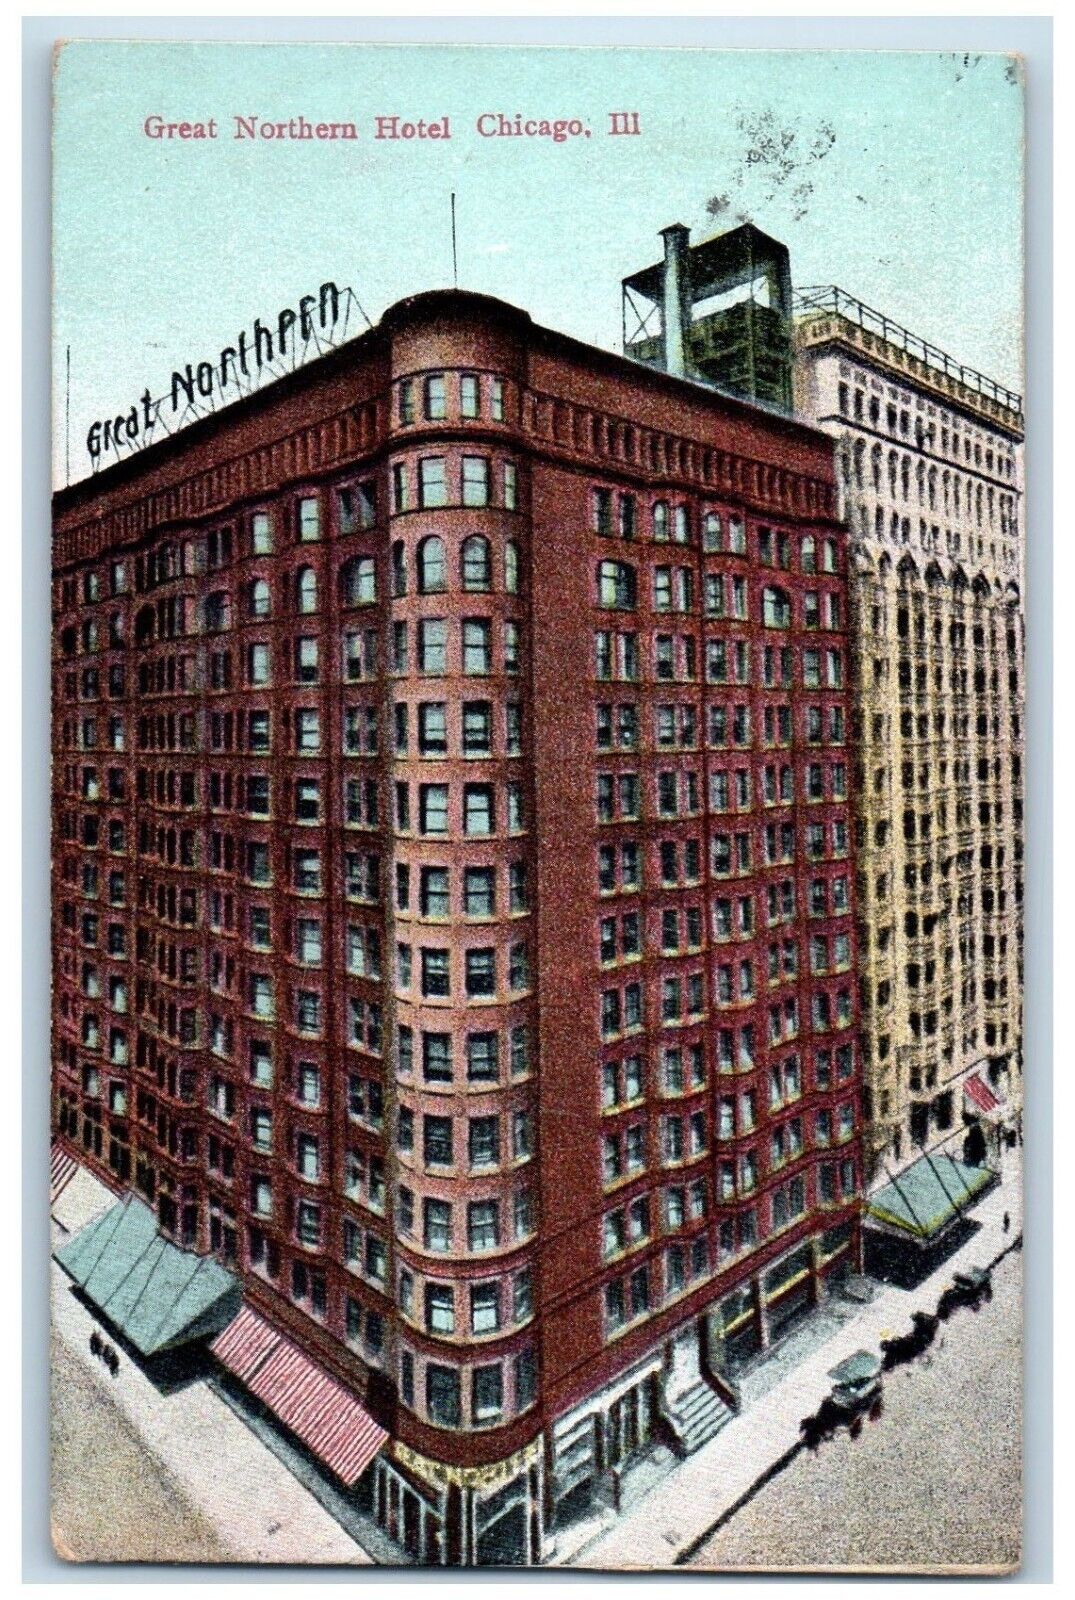 1911 Great Northern Hotel Exterior Building Chicago Illinois IL Vintage Postcard